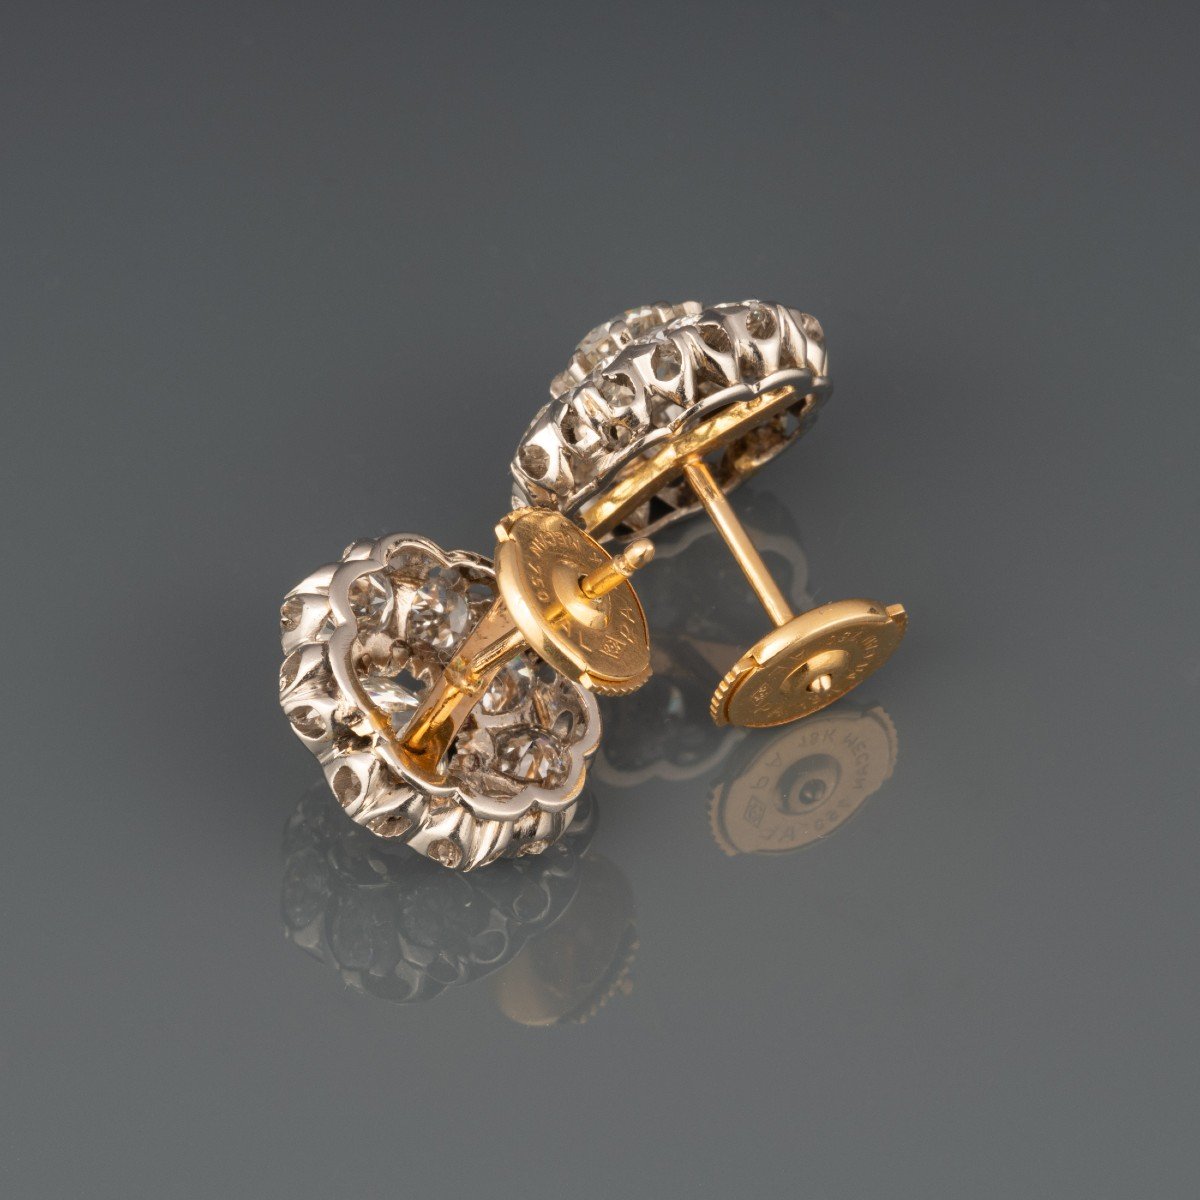 Antique Earrings In Platinum Gold And 3 Carats Of Diamonds-photo-5